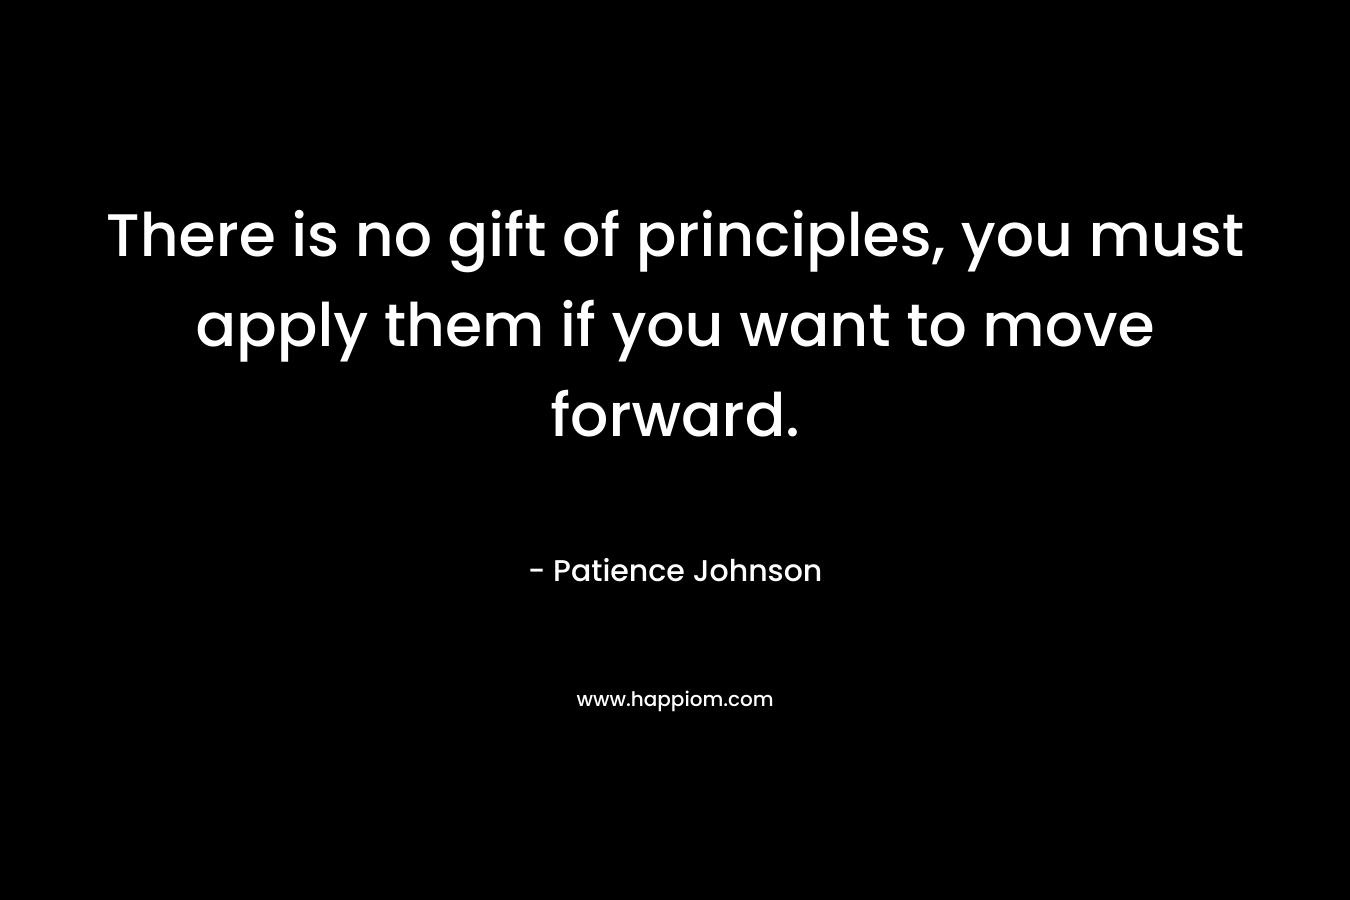 There is no gift of principles, you must apply them if you want to move forward. – Patience Johnson